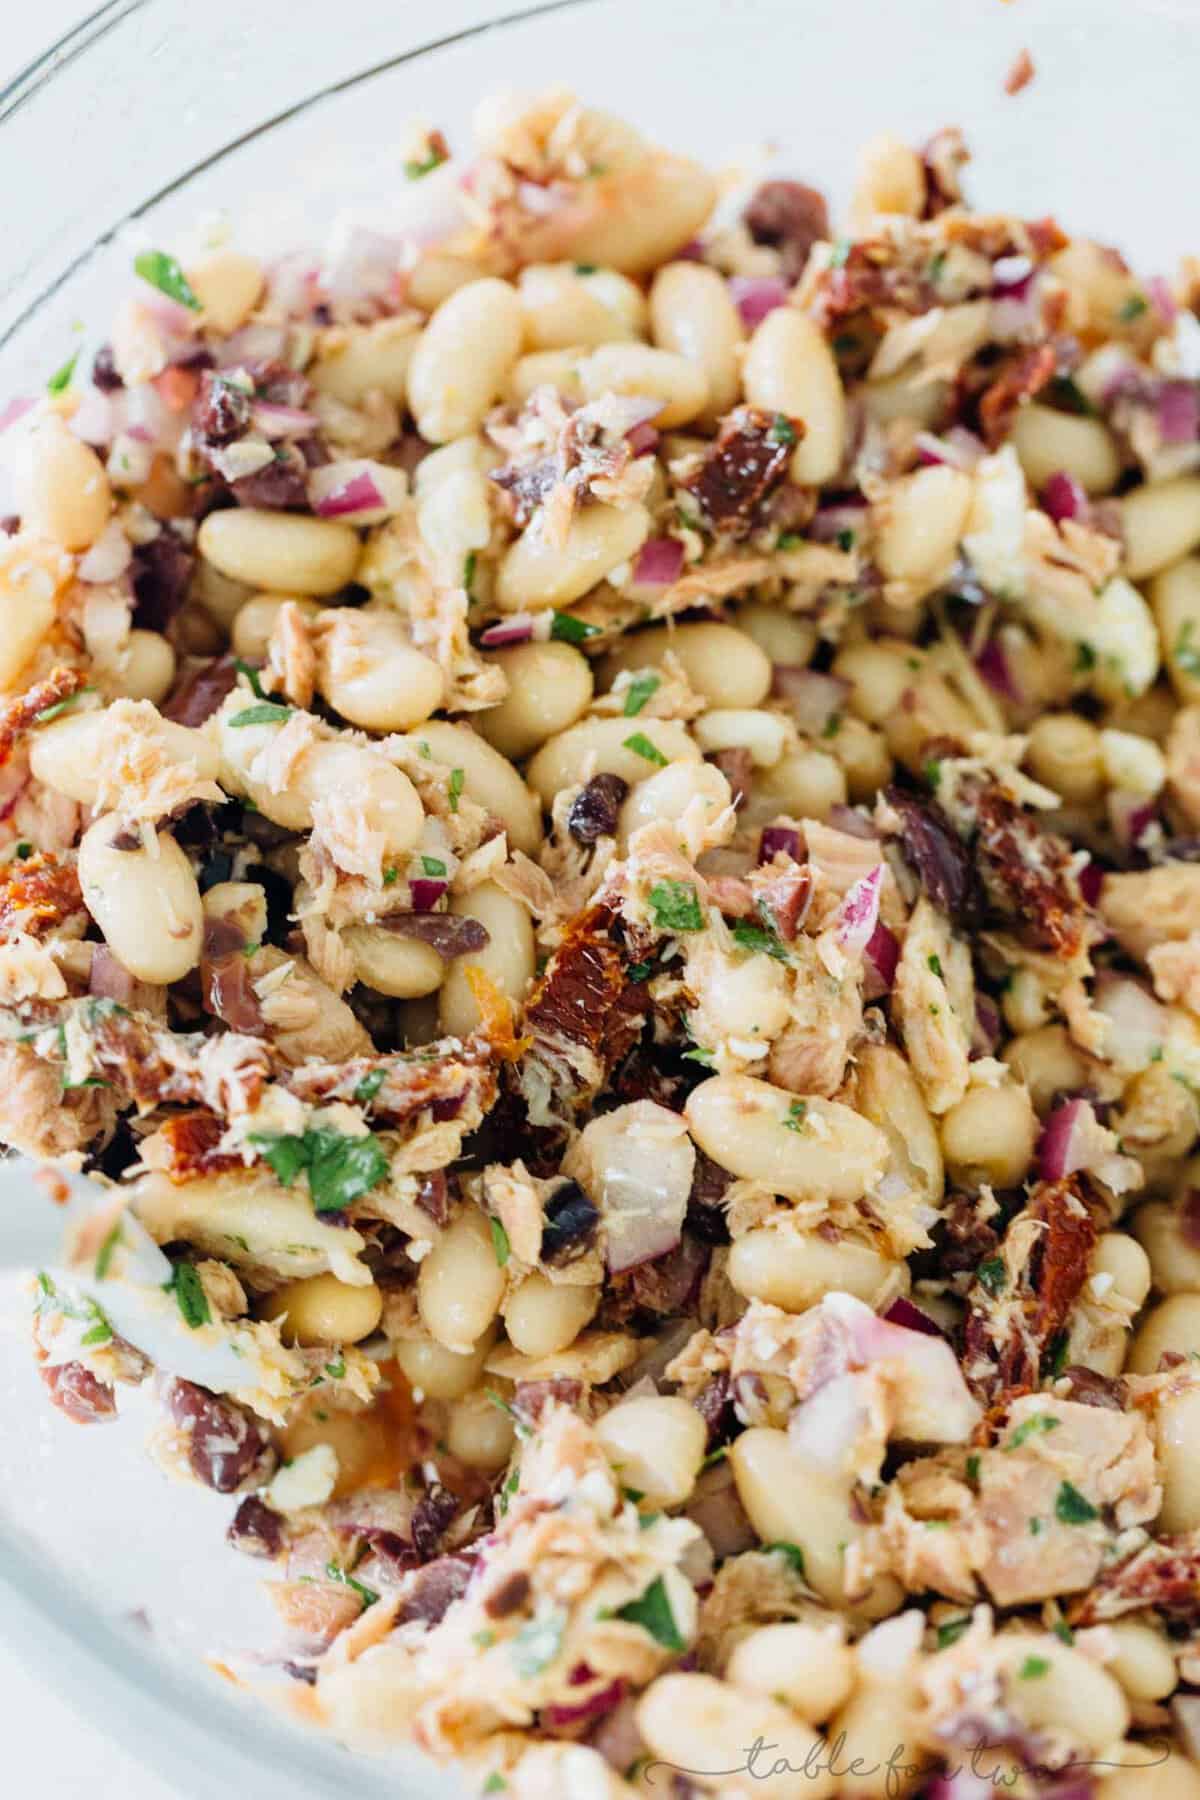 Mediterranean tuna white bean salad is full of flavorful ingredients and deliciously tasty tuna that is full of protein! An easy and healthy lunch option for those who are looking for new lunch ideas that will keep you full!